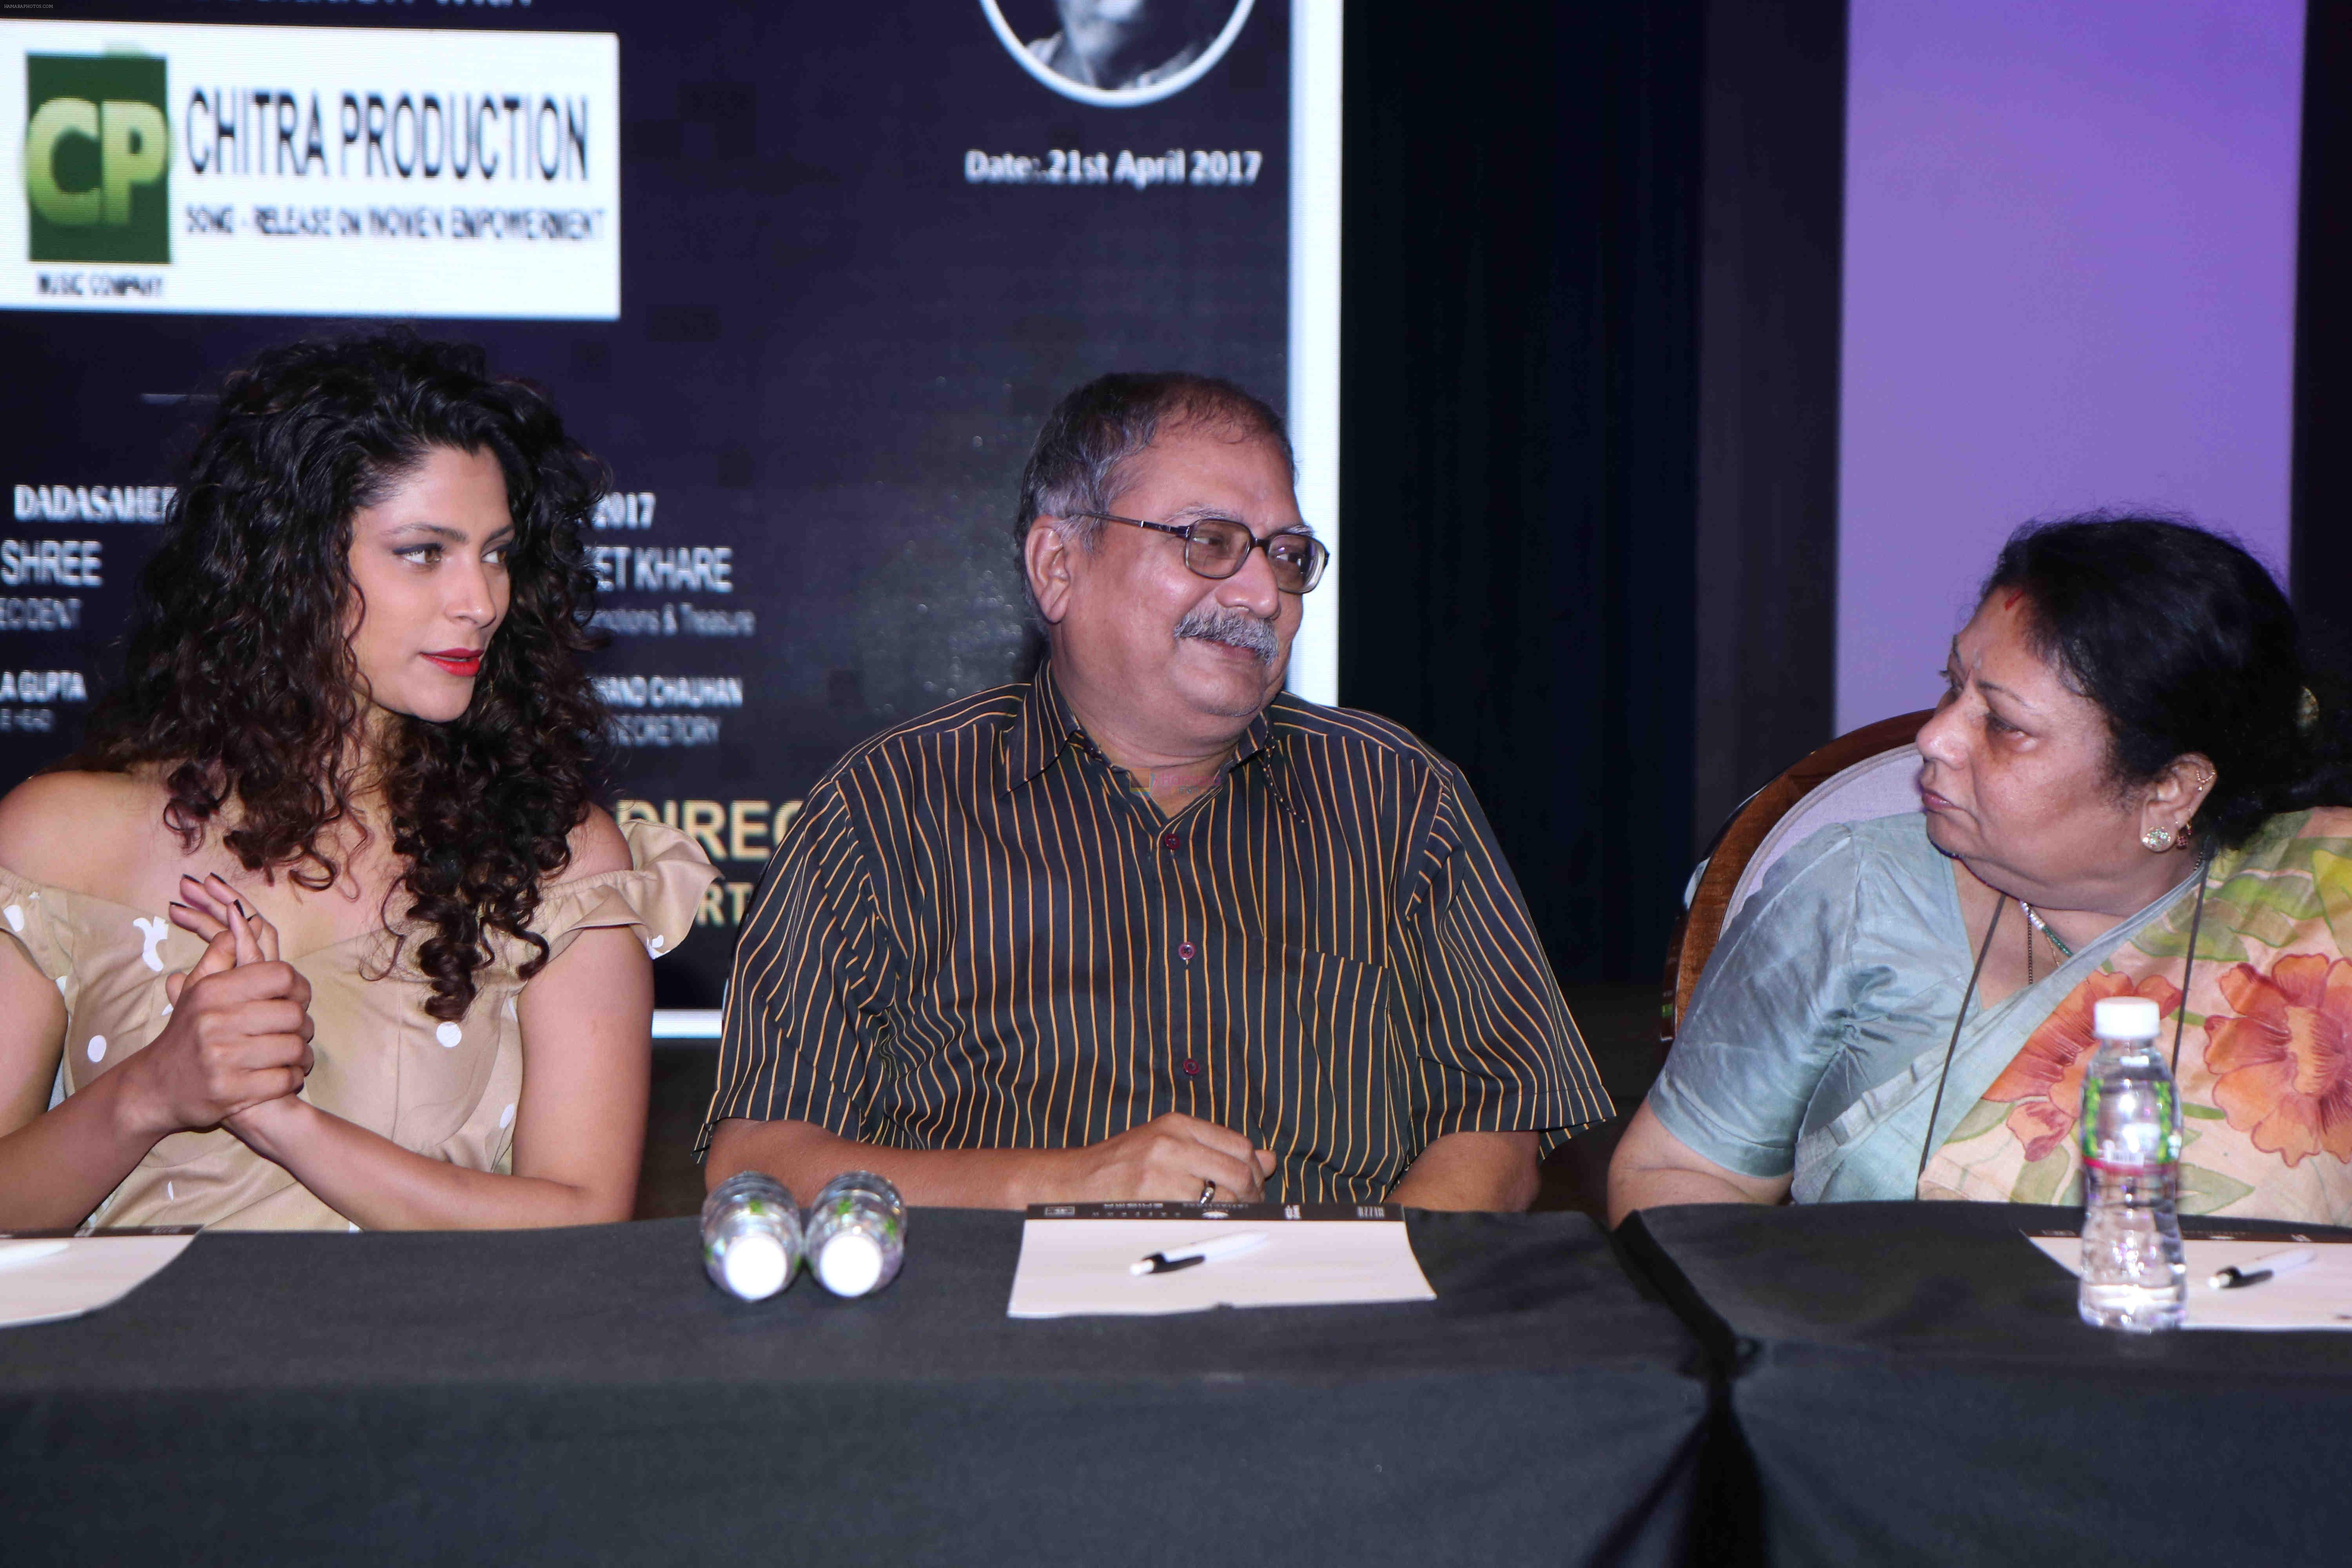 Saiyami Kher at the Announcement of Dadsaheb Phalke Excellence Awards 2017 on 19th April 2017